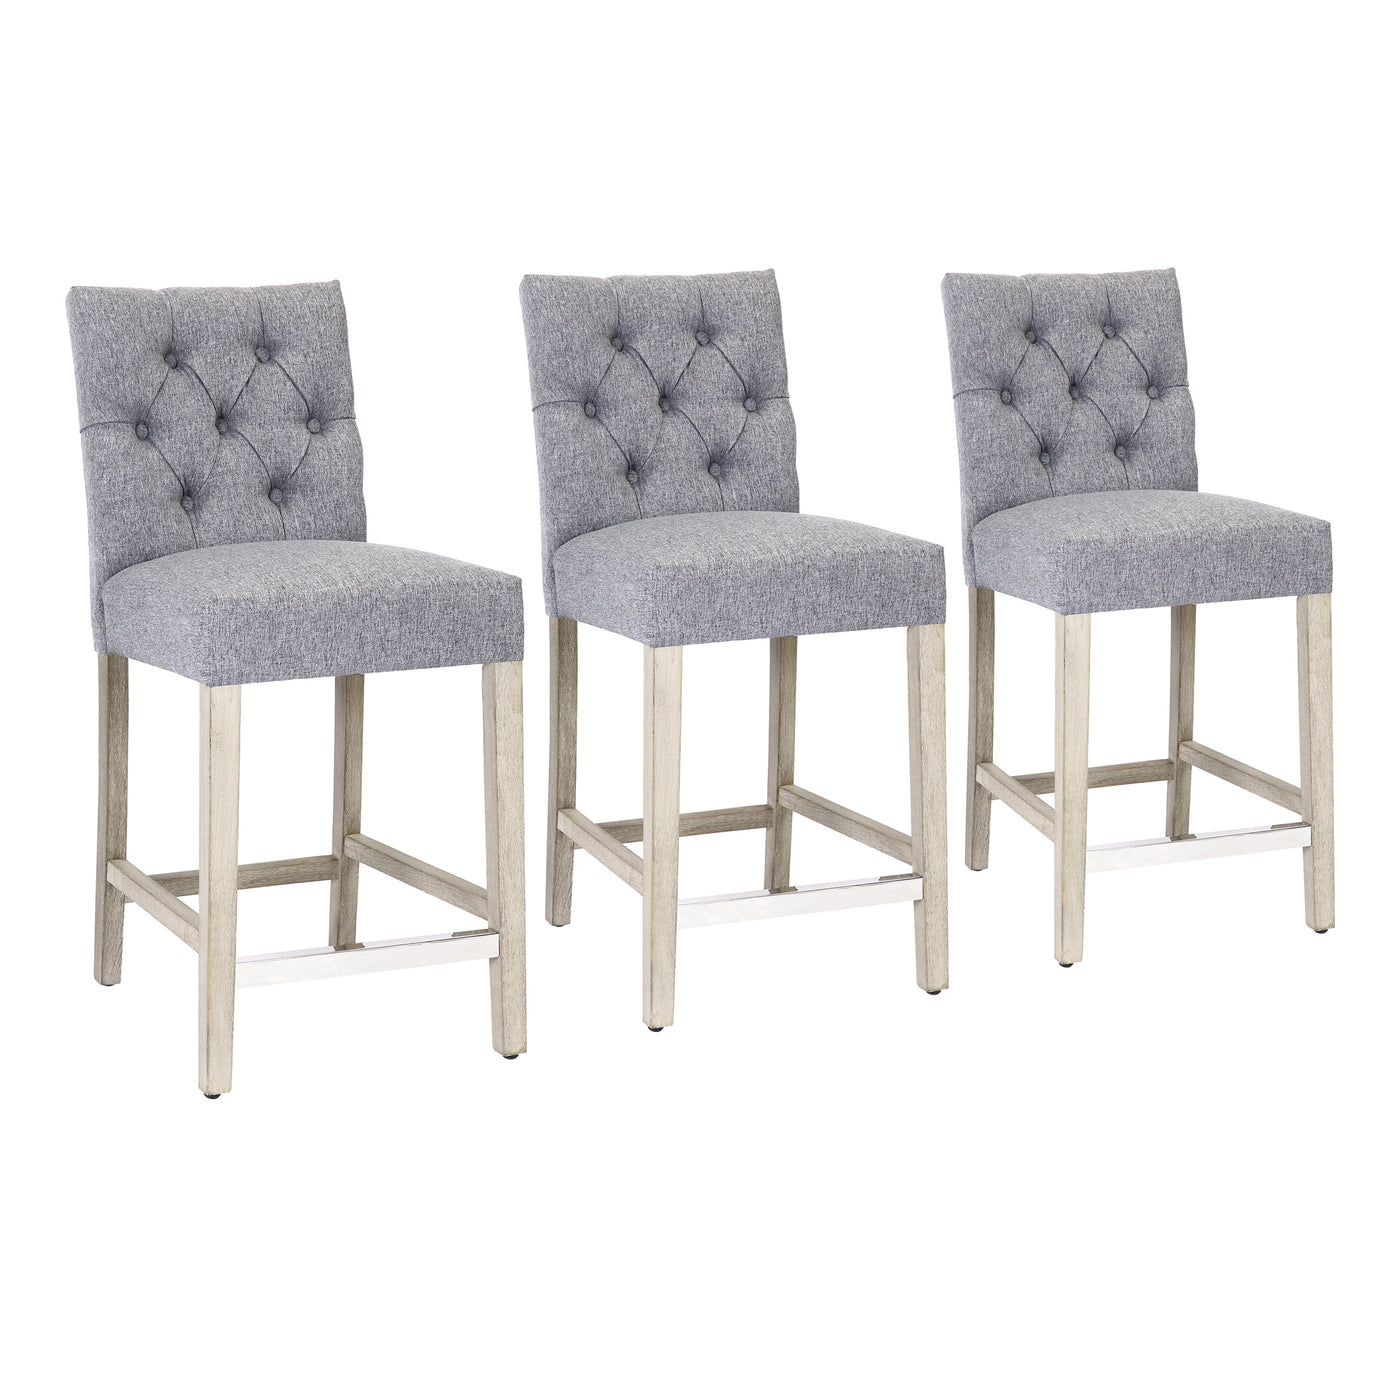 Hayes 24" Linen Fabric Tufted Counter Stool (Set of 3), Antique Gray